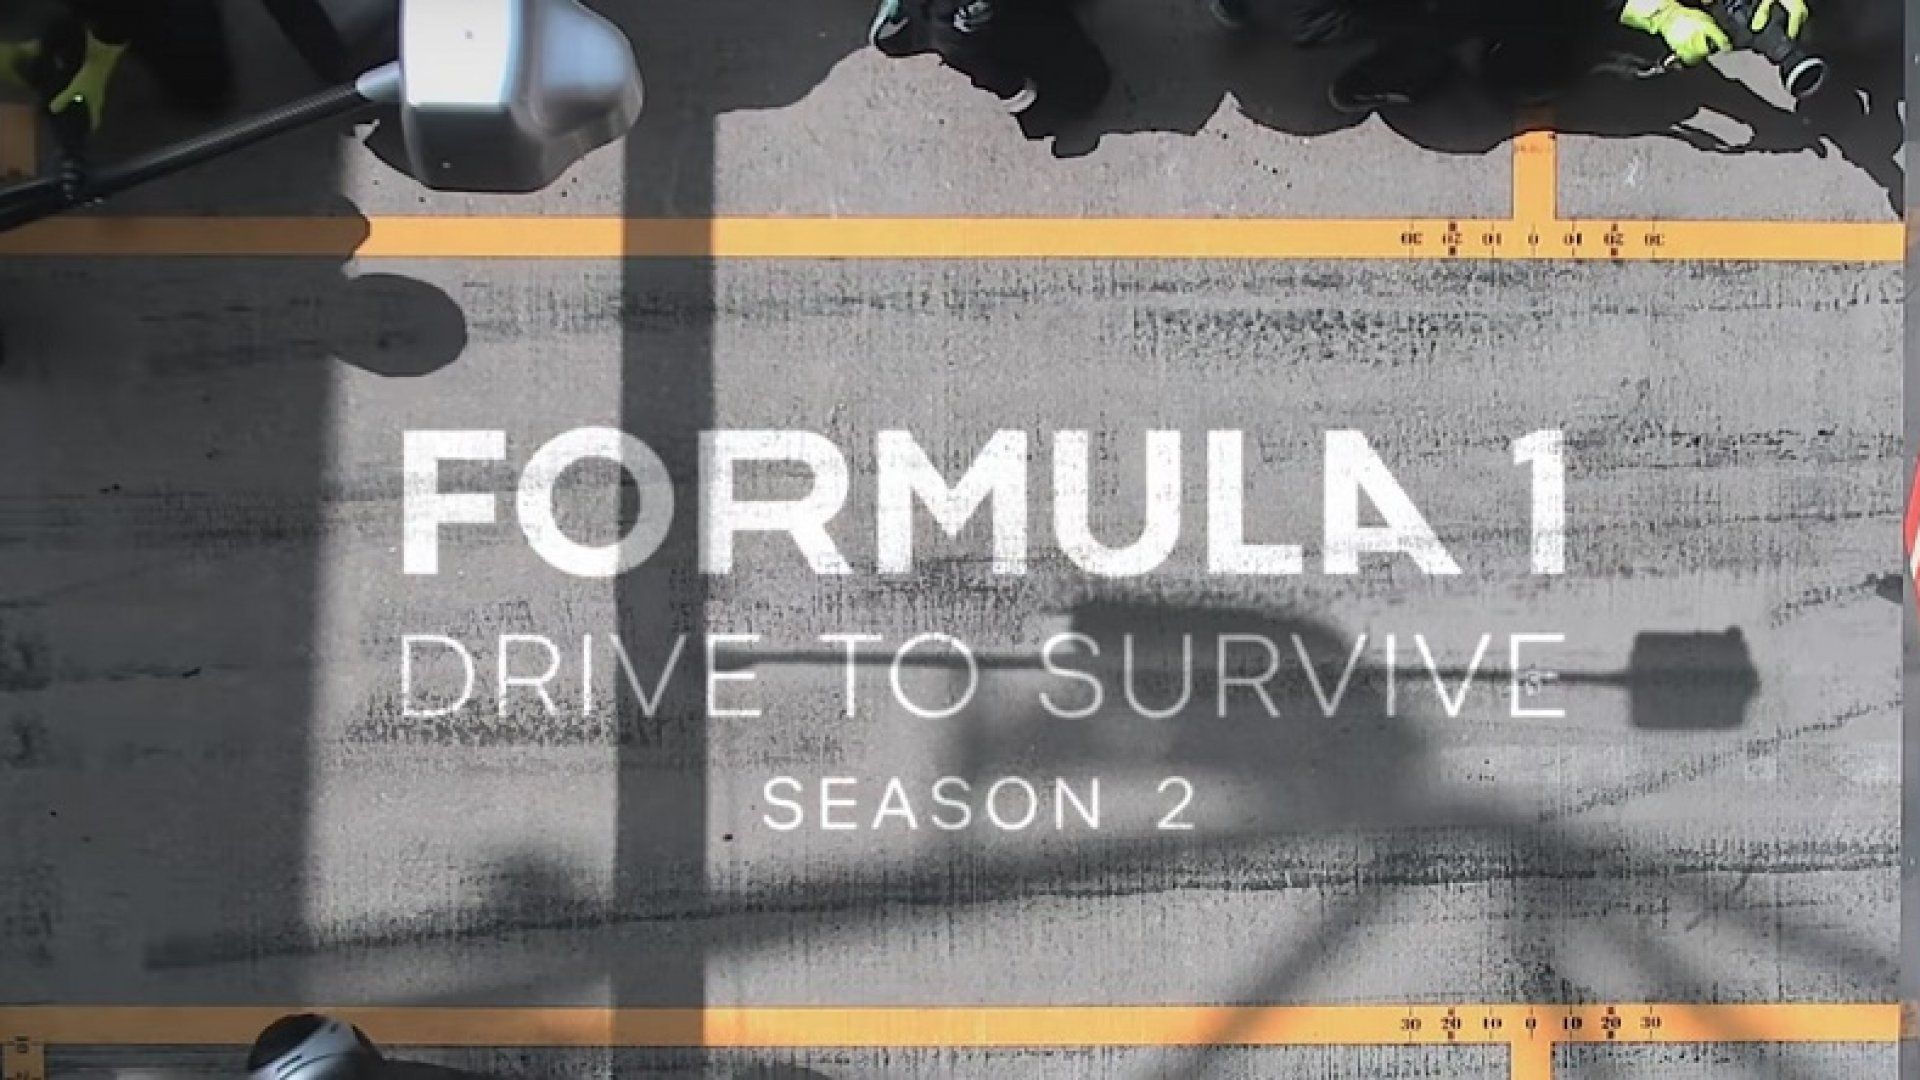 Check Out The 'Drive to Survive' Season 2